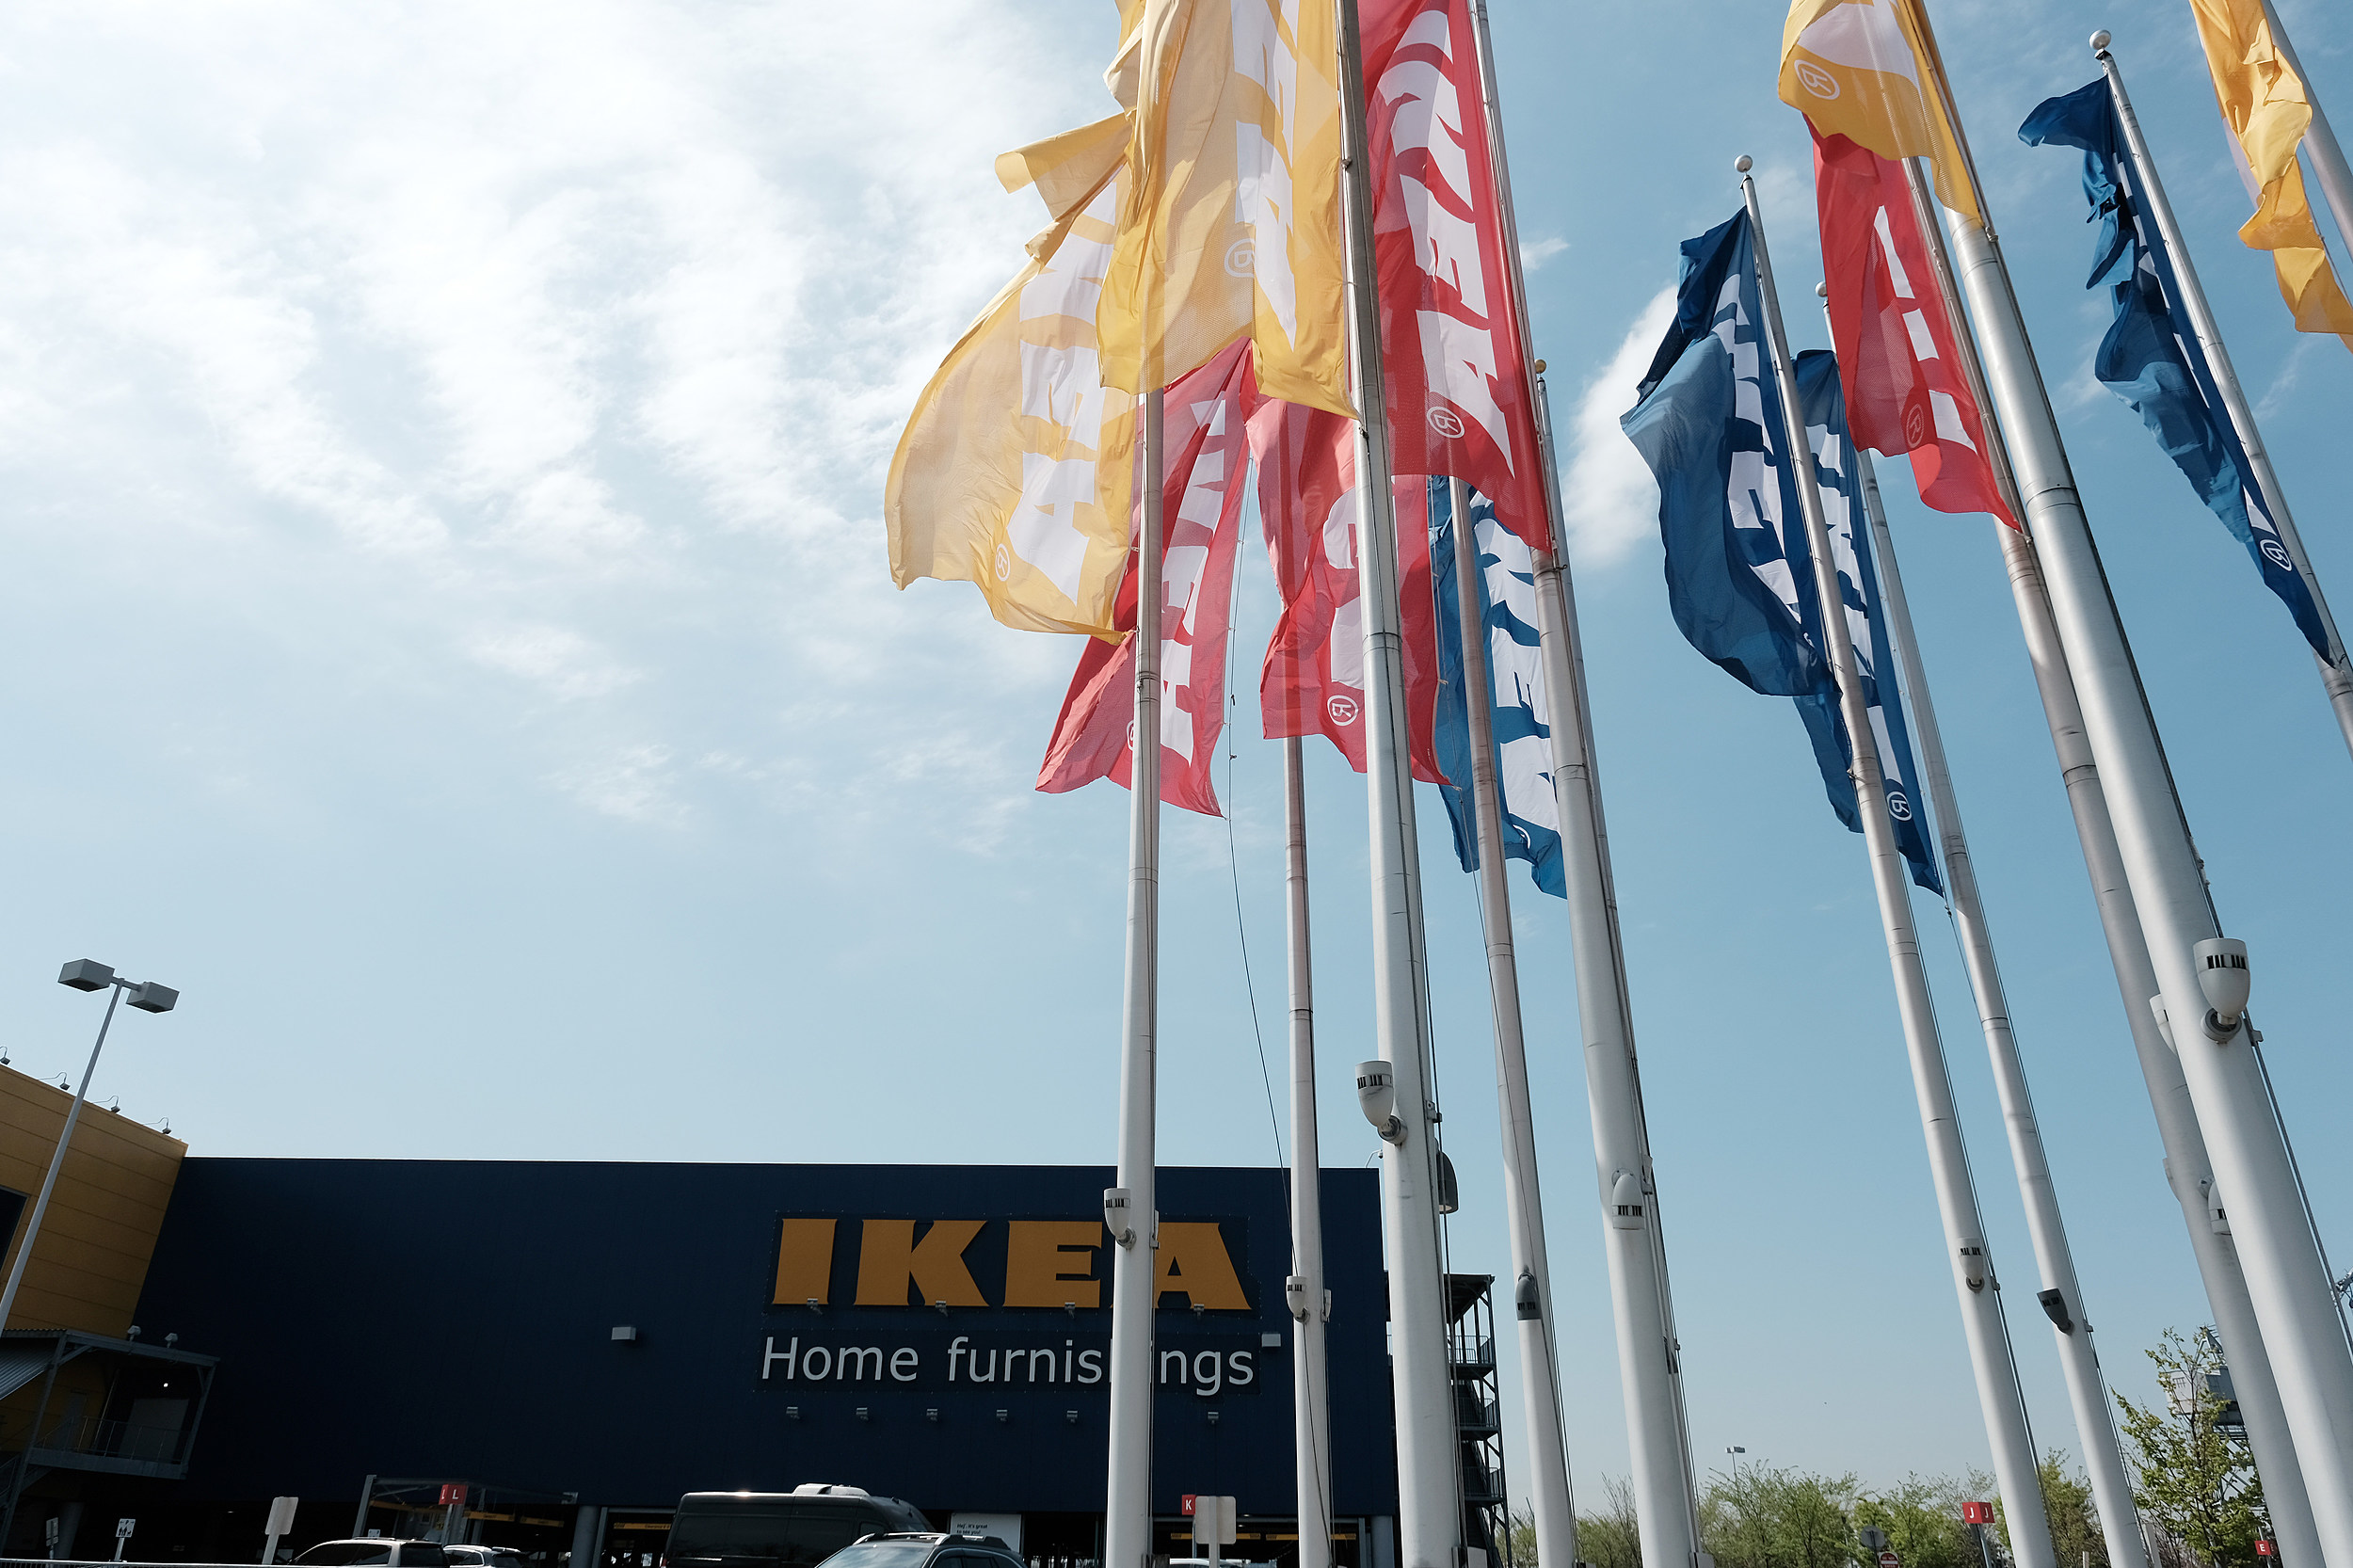 Ikea Plans New Stores And Over 2 Billion In Investment In U.S. Market